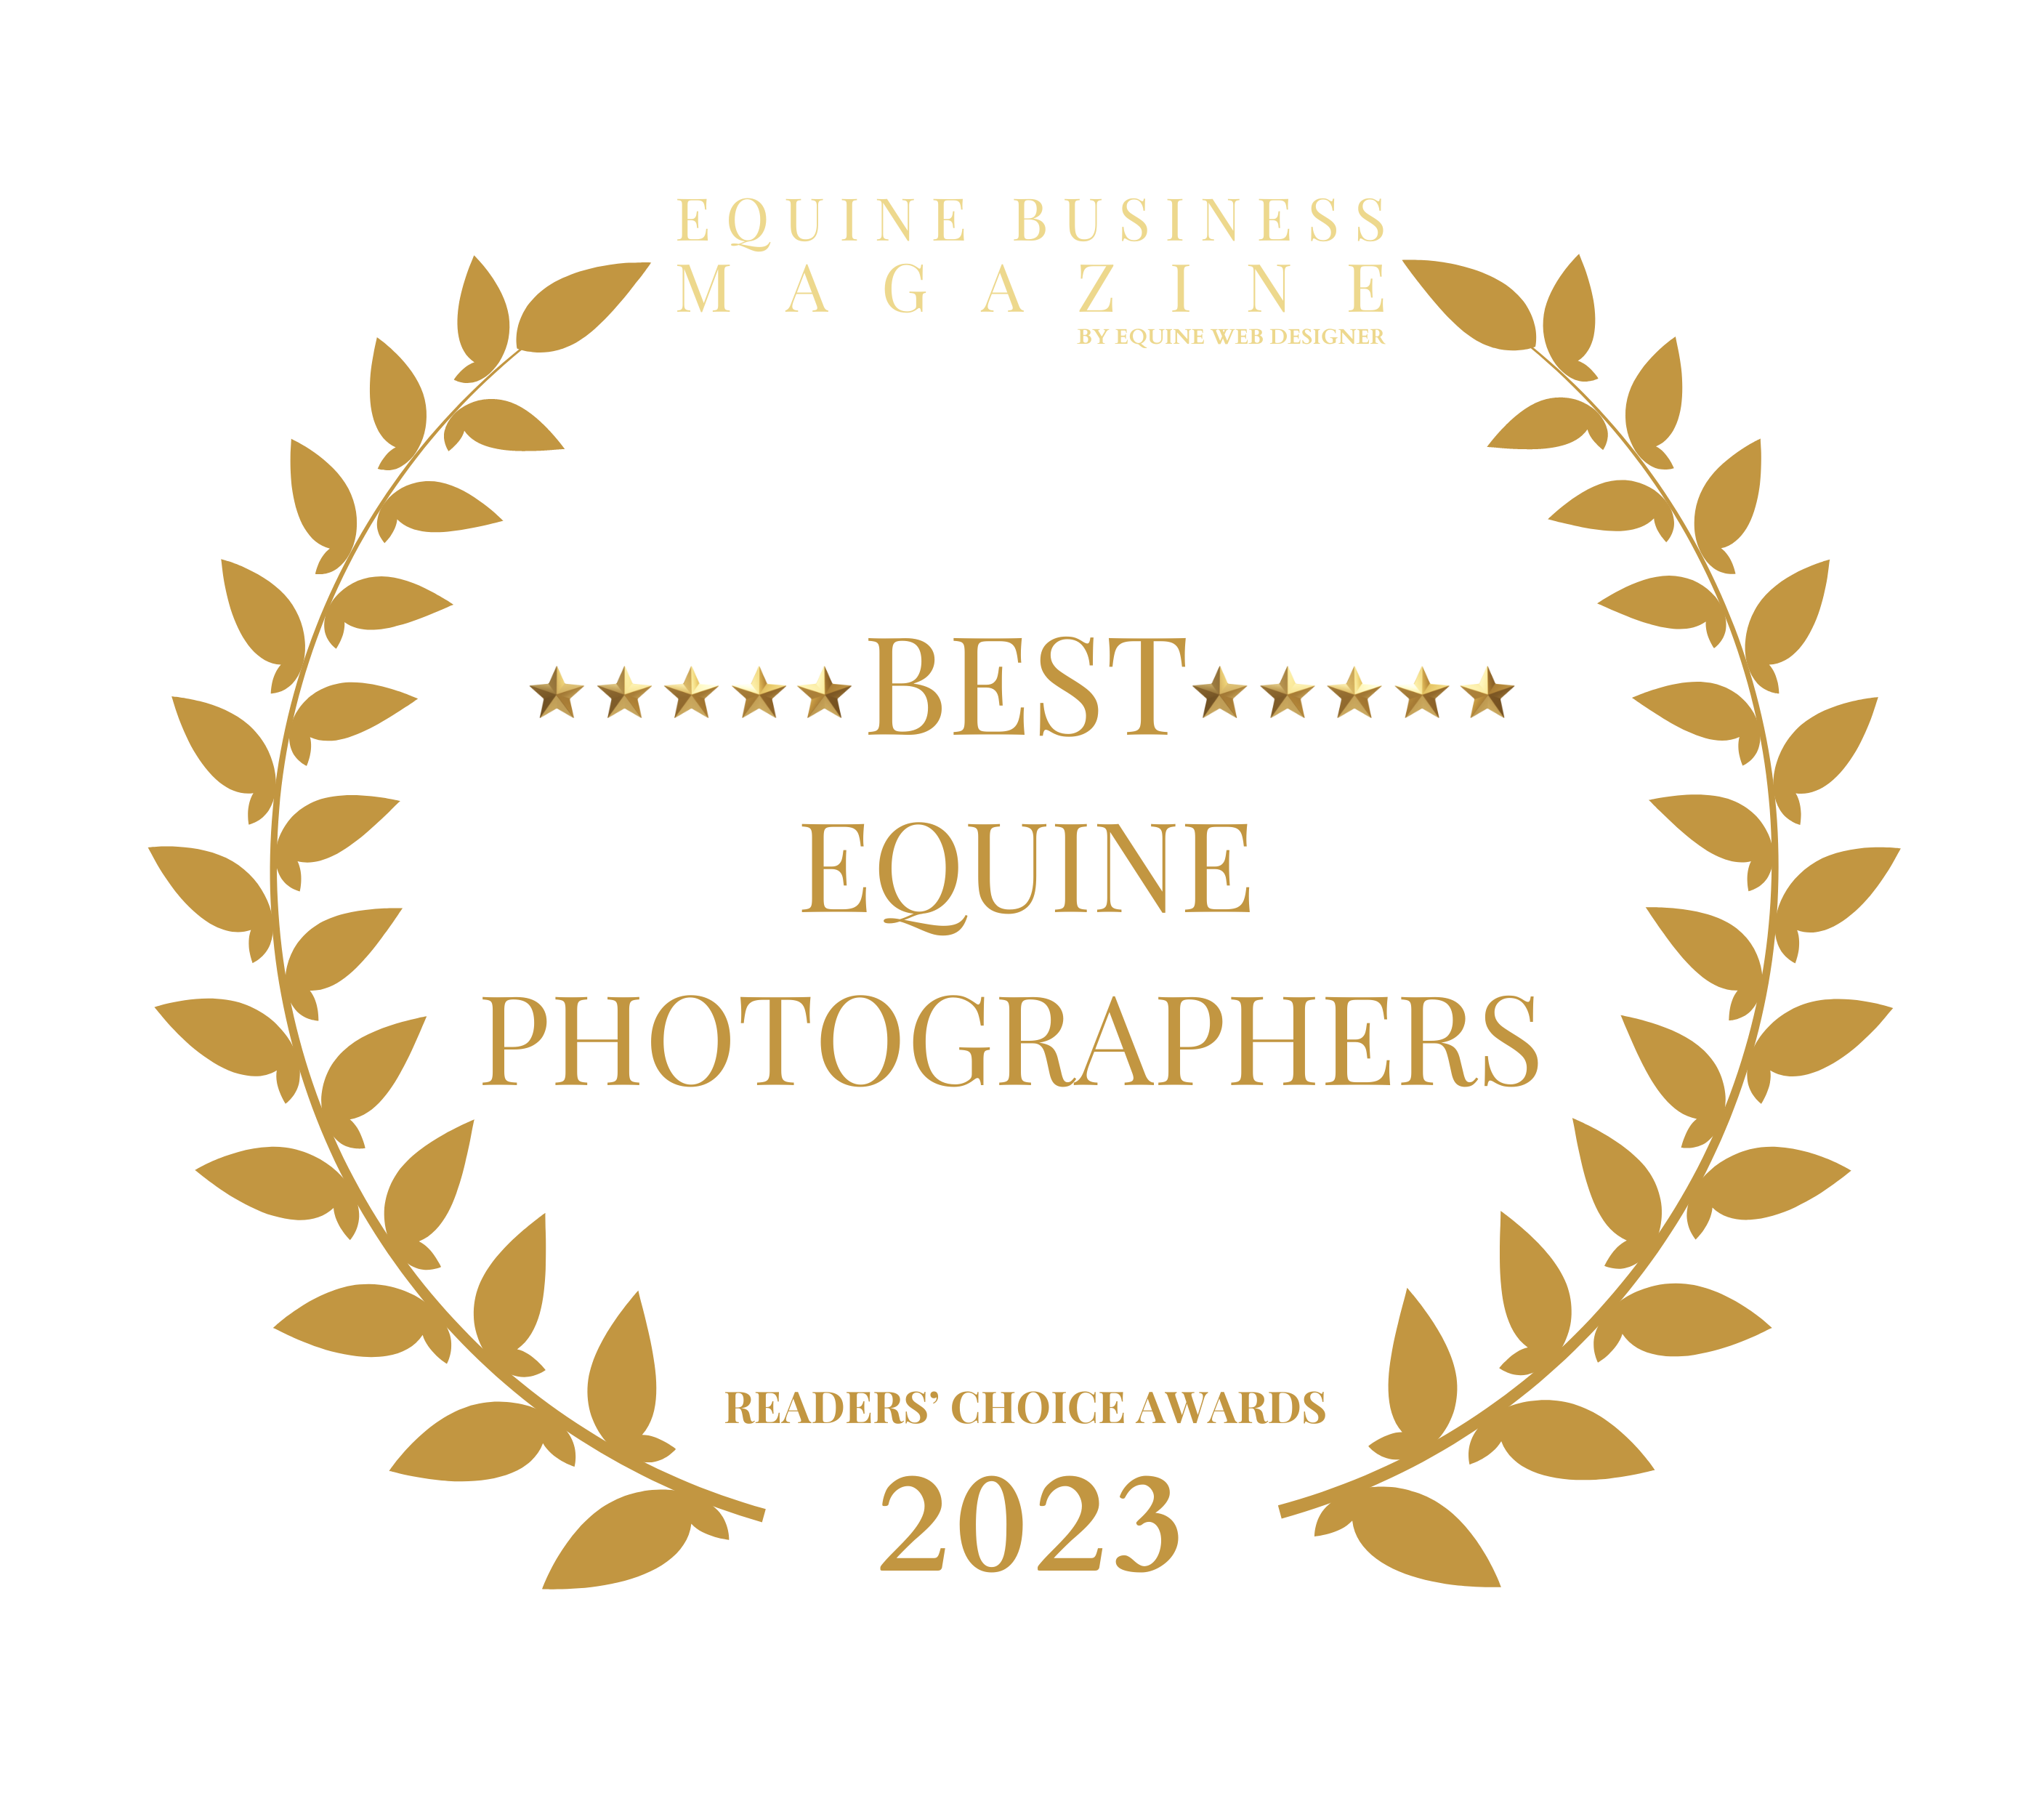 Badge for Best Equine Photographer as voted on by Readers of the Equine Business Magazine